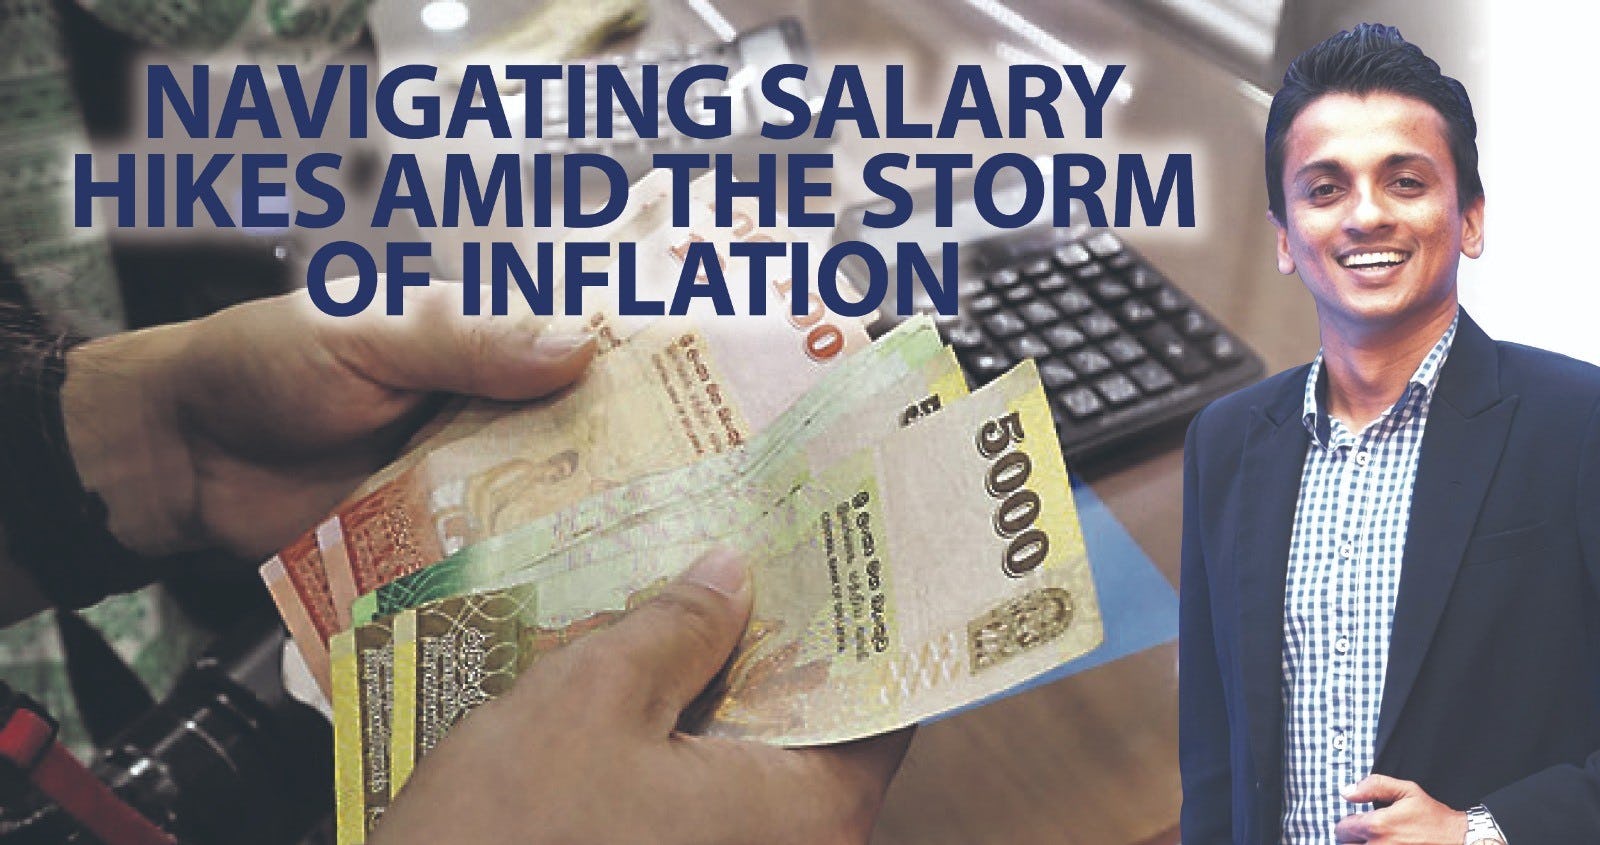 Navigating salary hikes amid the storm of inflation